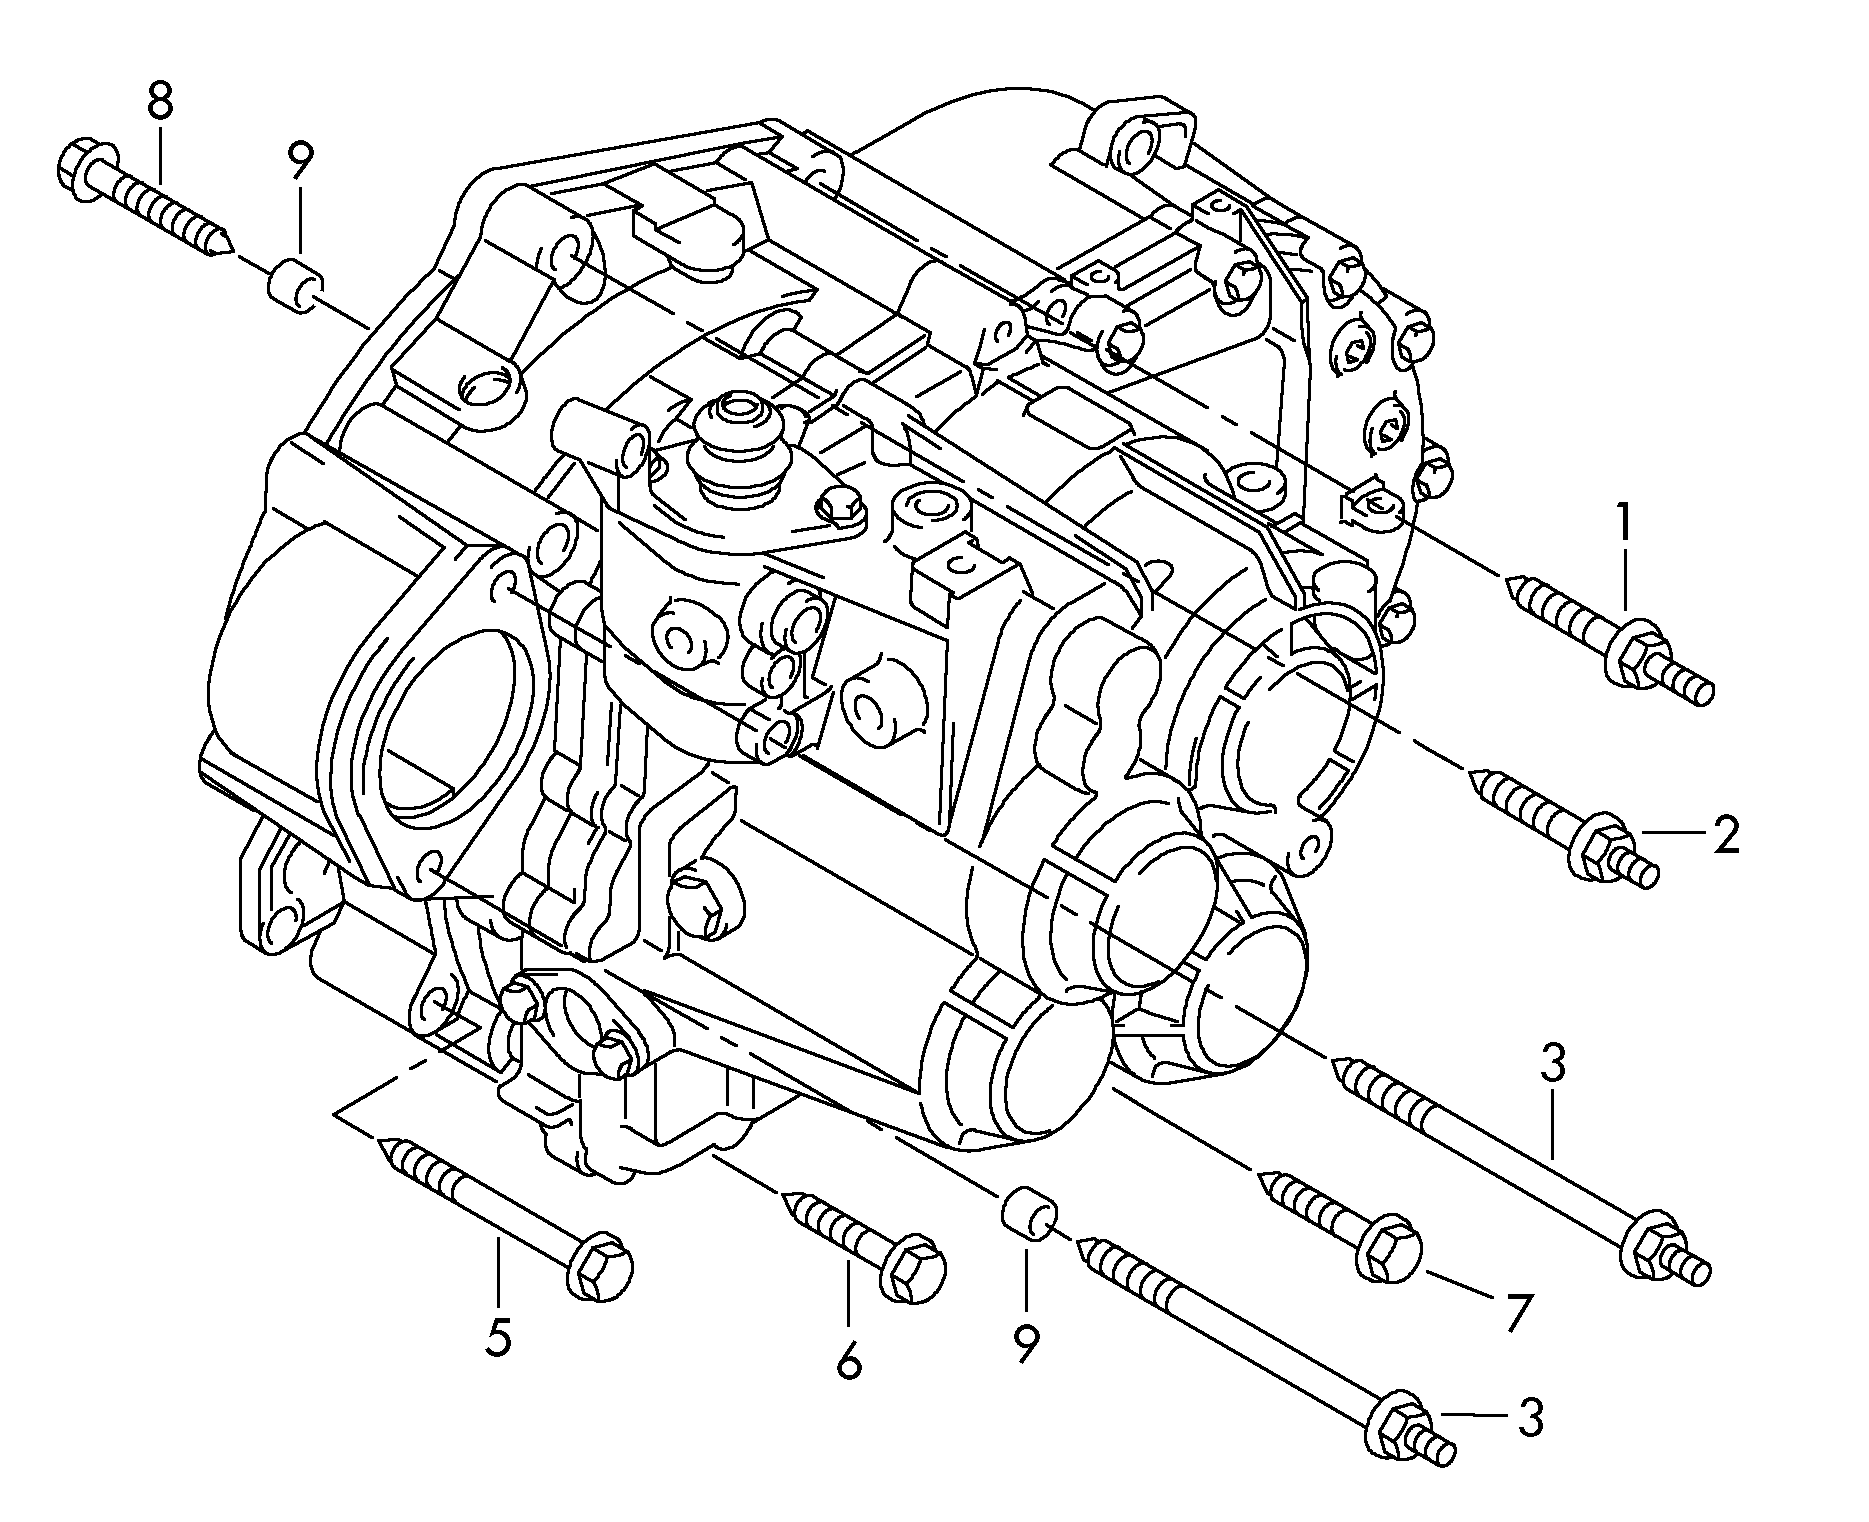 mounting parts for engine and<br>transmissionfor 6 speed manual gearbox MQ350 - Octavia - oct